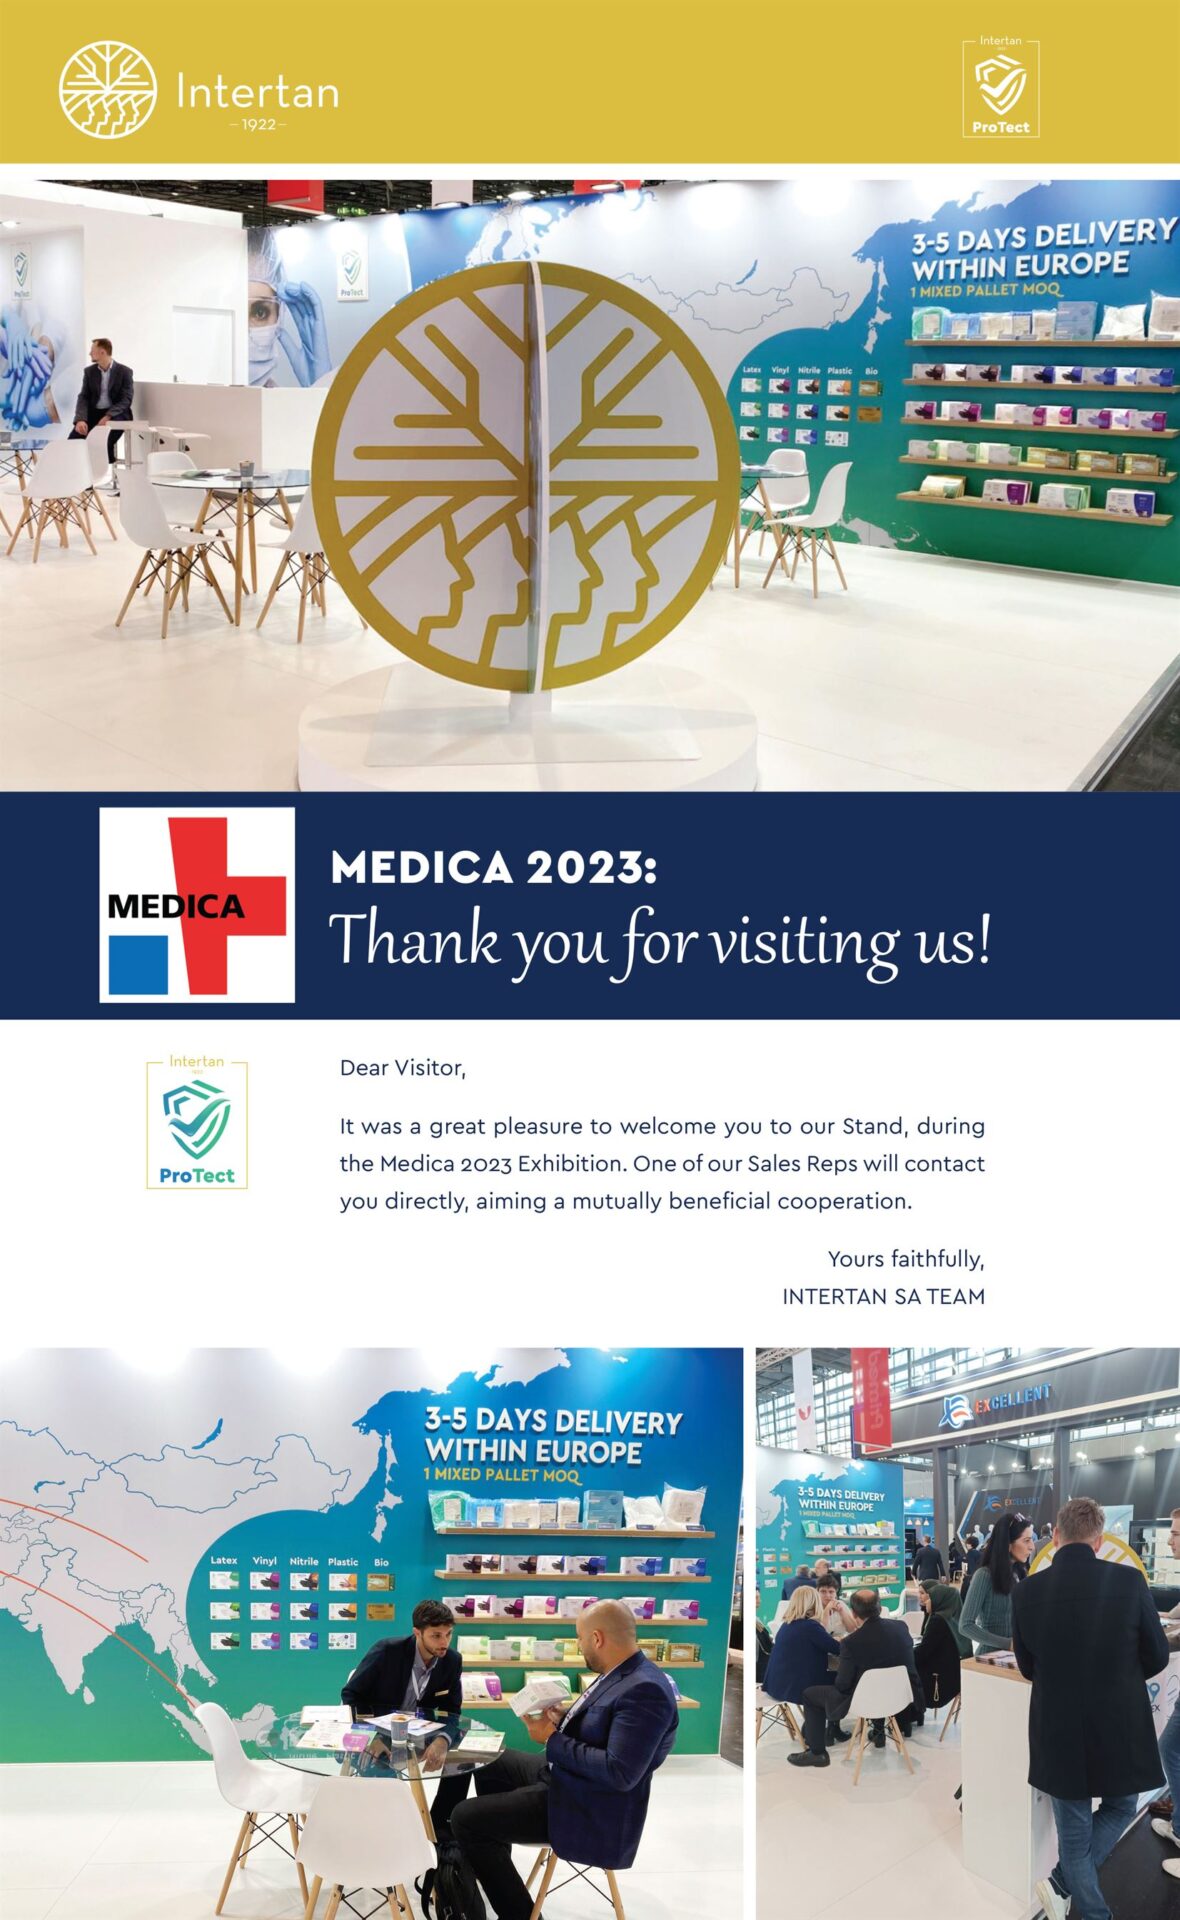 Medica 2023: Thank you for visiting us Newsletter | Intertan S.A.